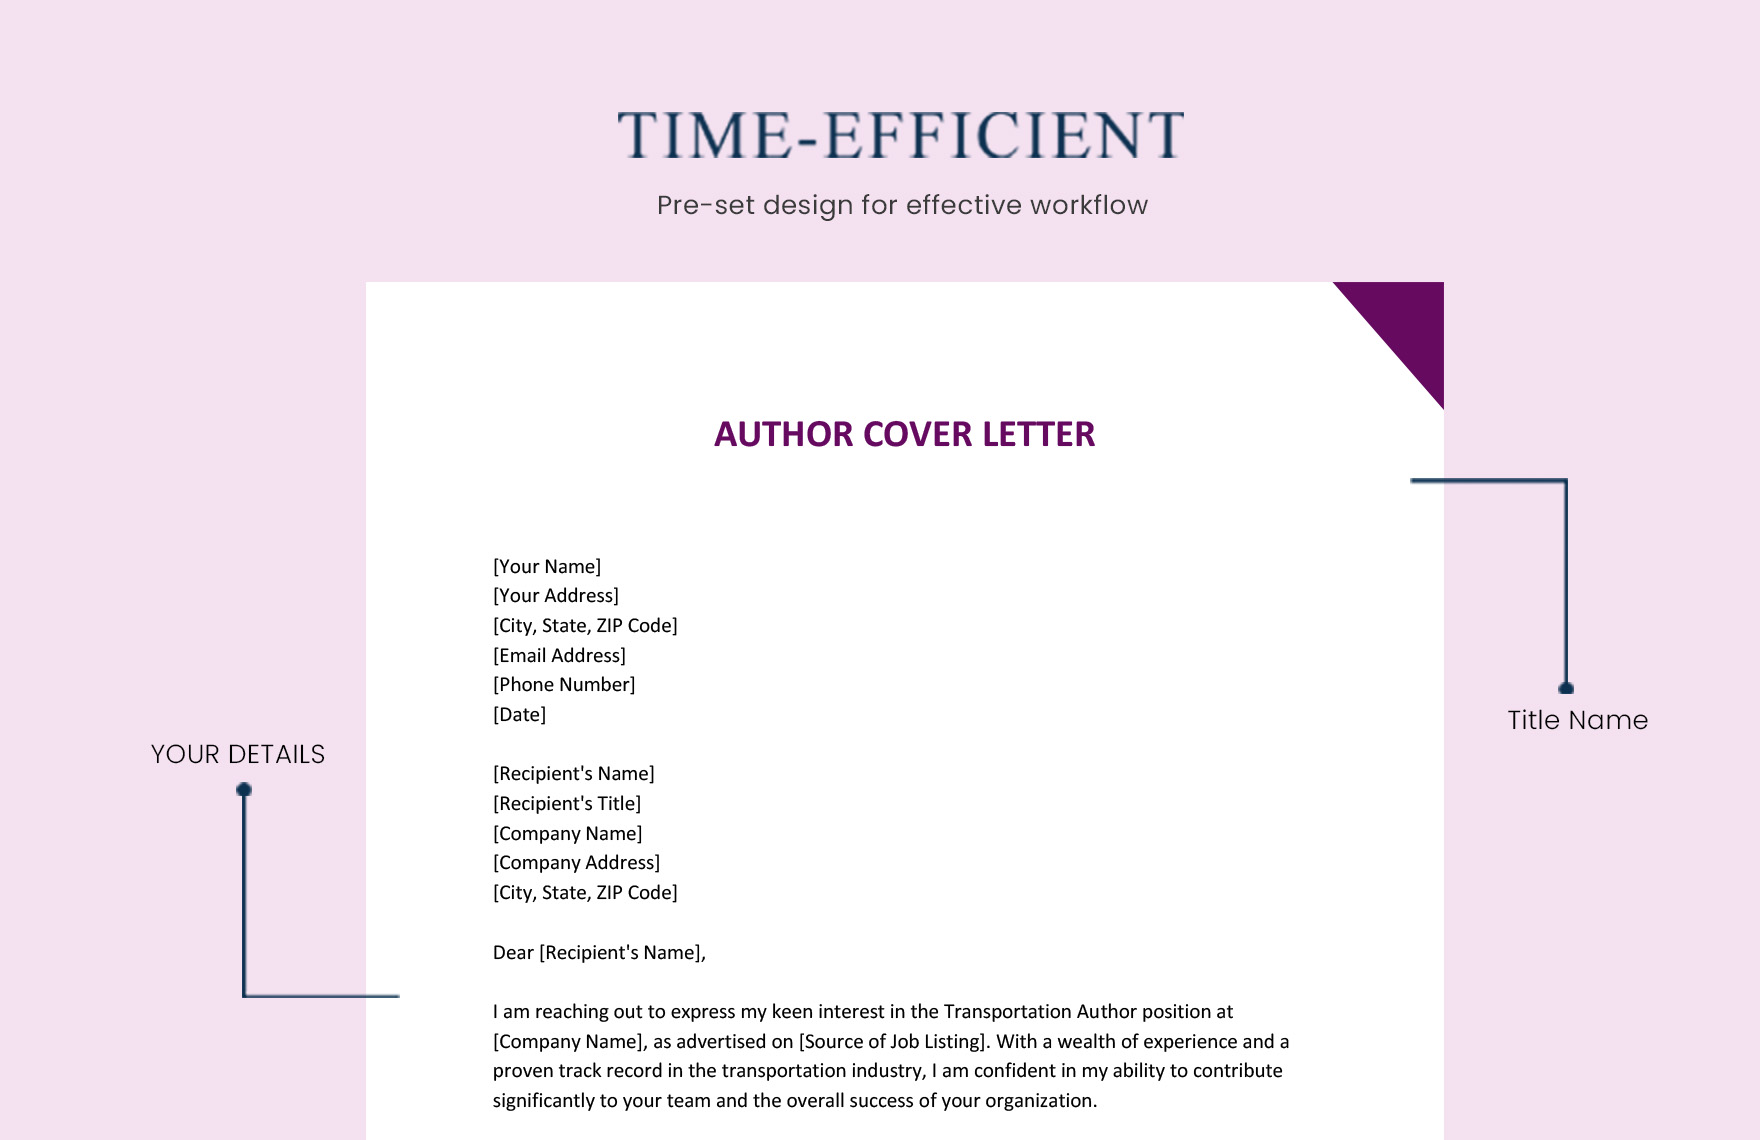 Author Cover Letter